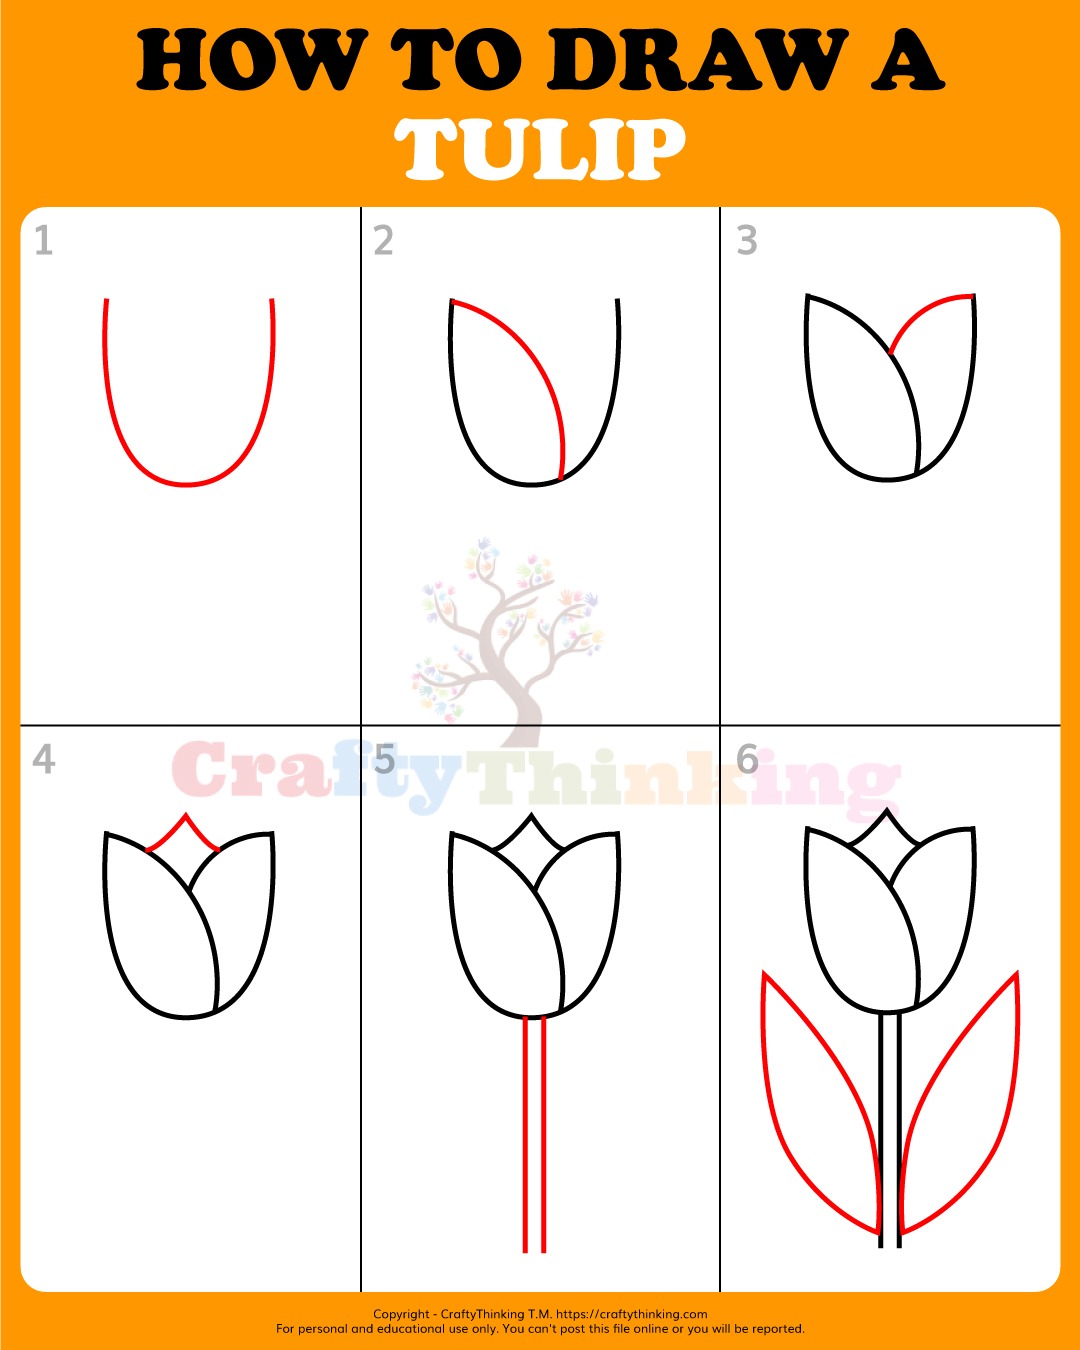 How To Draw A Tulip (Step by Step) CraftyThinking